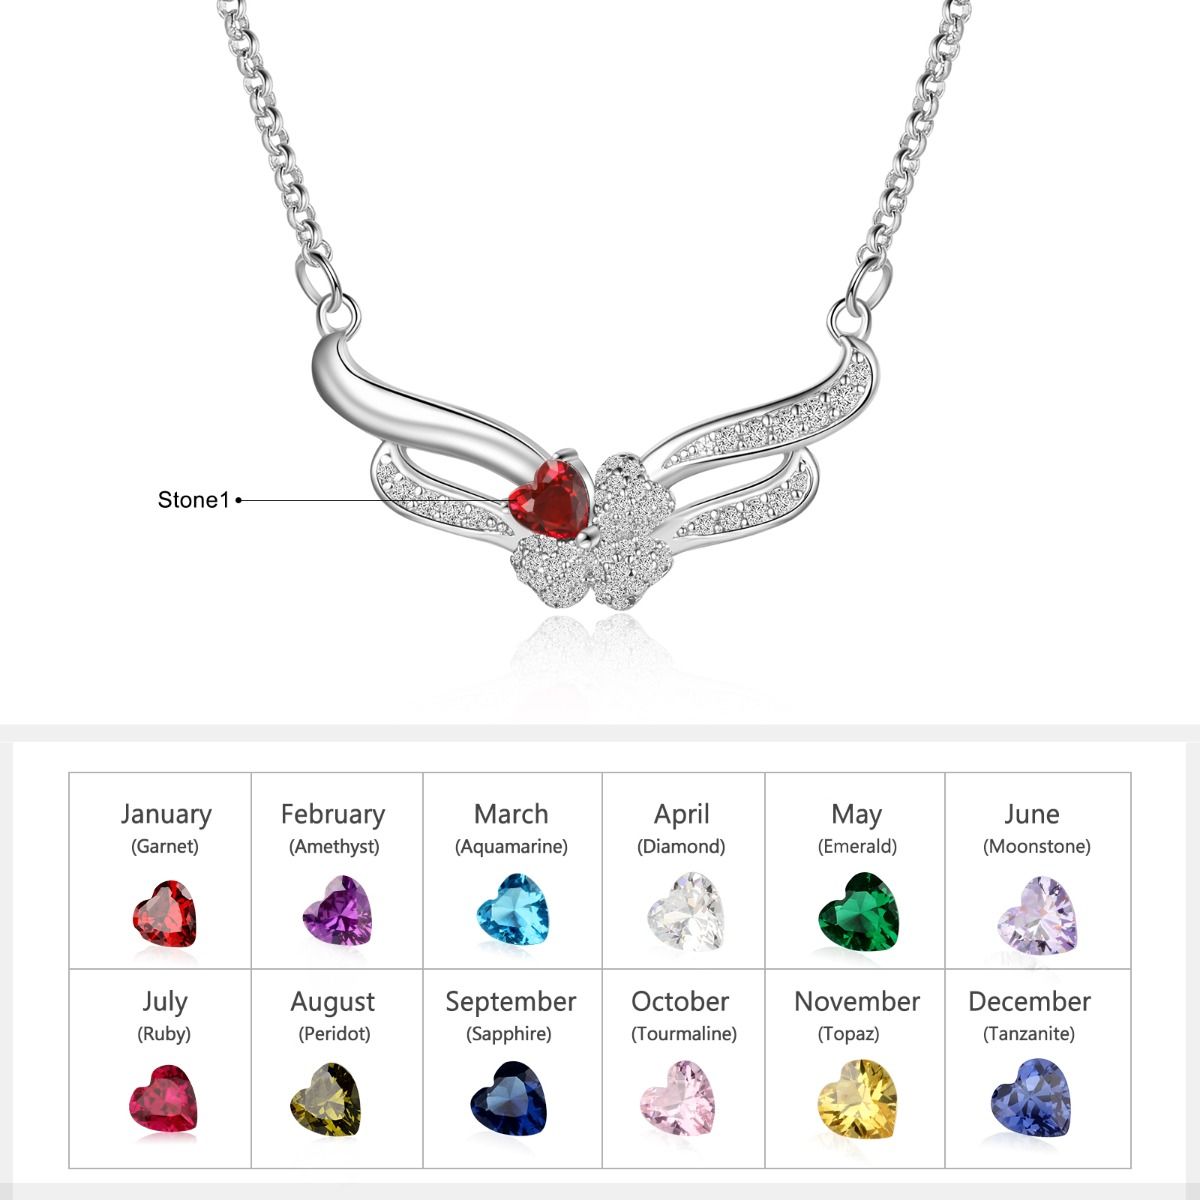 Customised Clover Necklace With Up To 4 Birthstones And Engraved Names | Bespoke Birthday Gift For Her